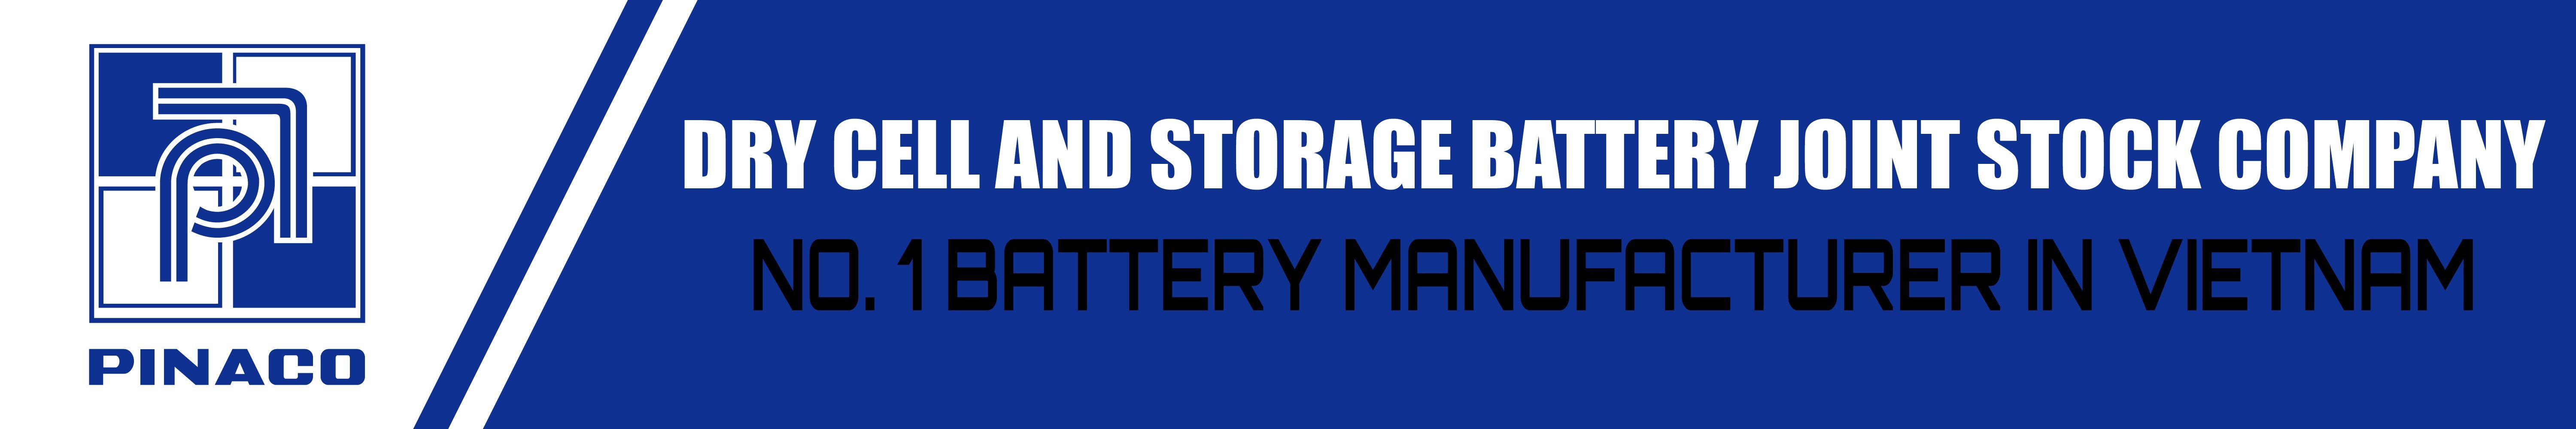 Dry Cell And Storage Battery Joint Stock Company